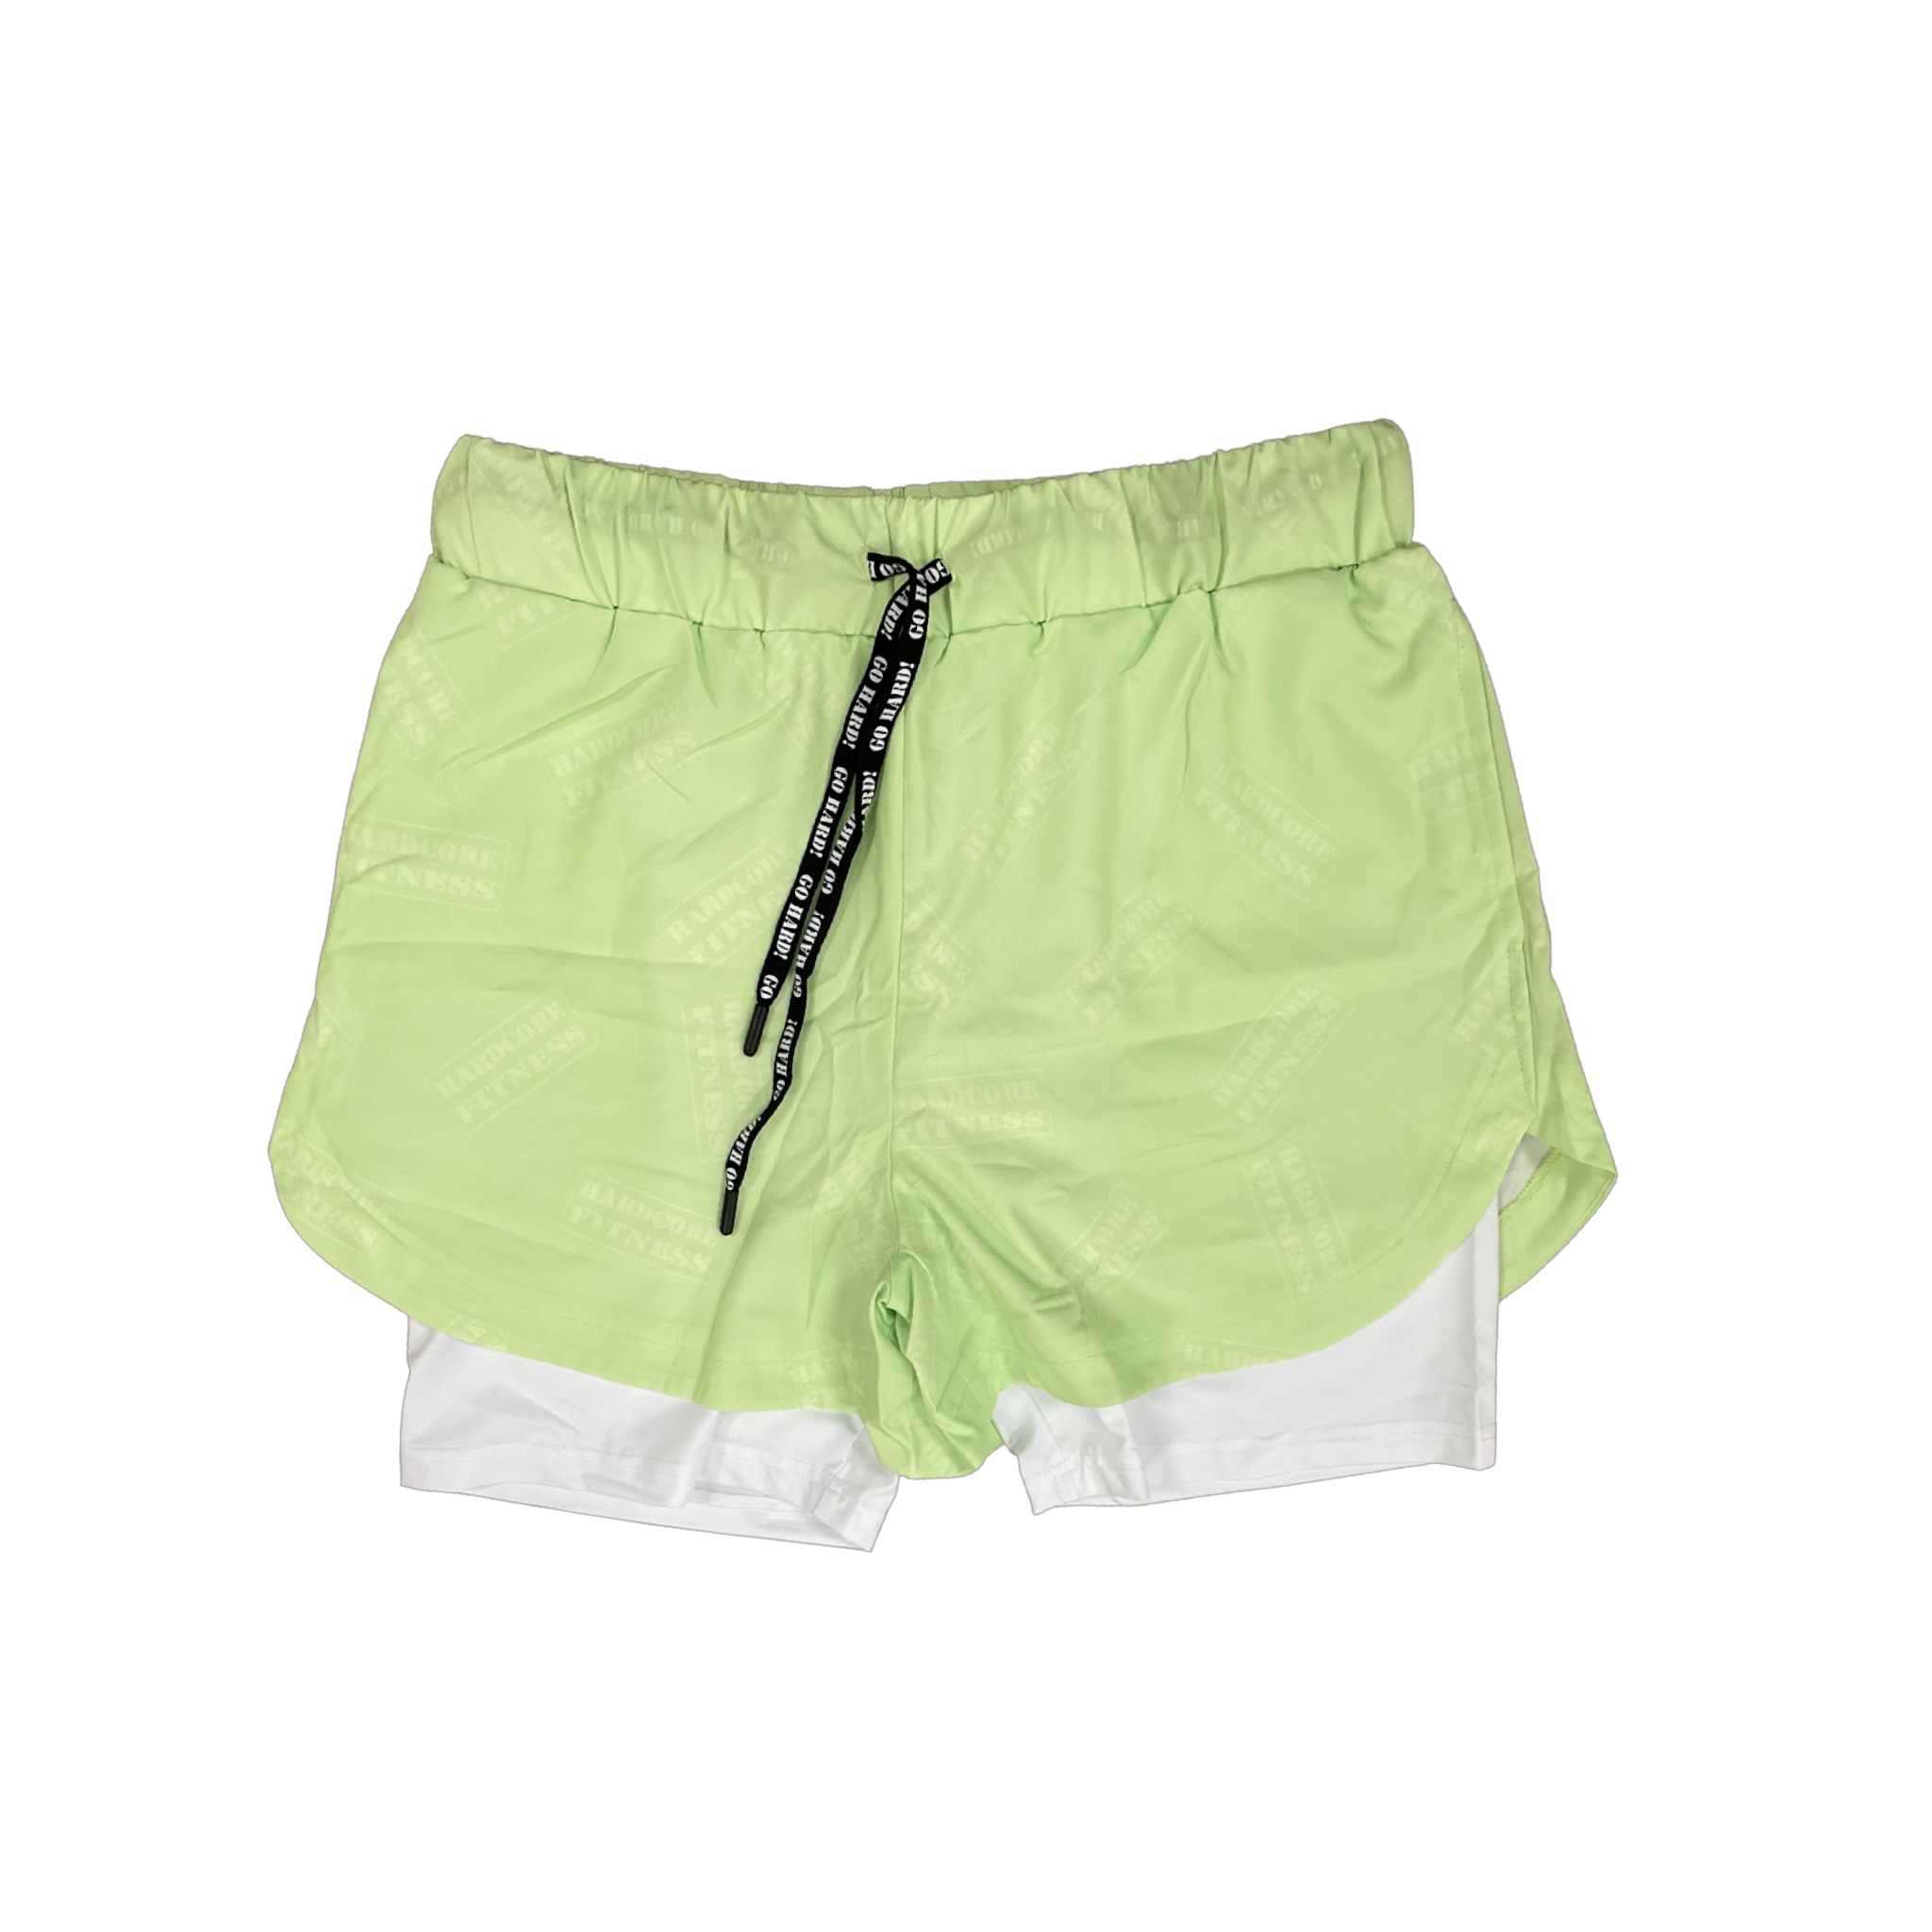 SHORTS - Male - Shorts - Built-In Compression